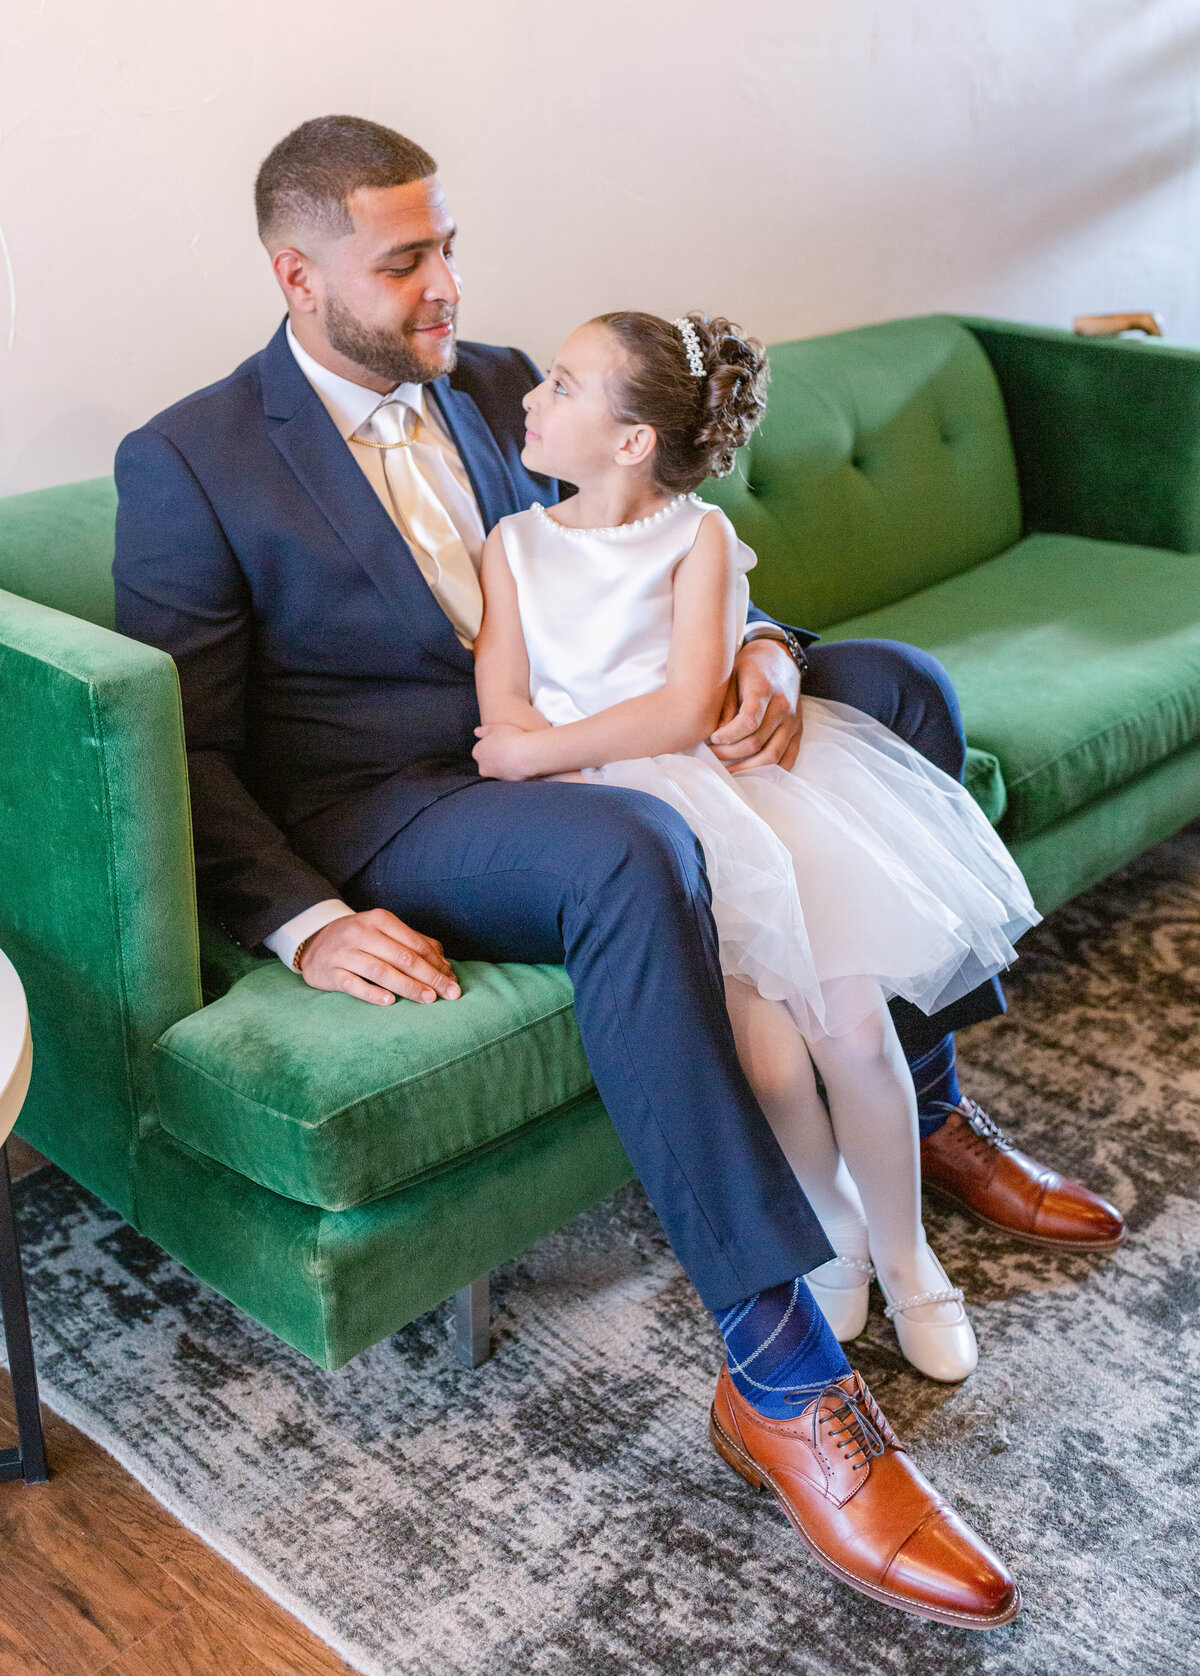 Groom and daughter sitting on couch during getting ready photos at The Refinery at 120 in Culpeper, Virginia.